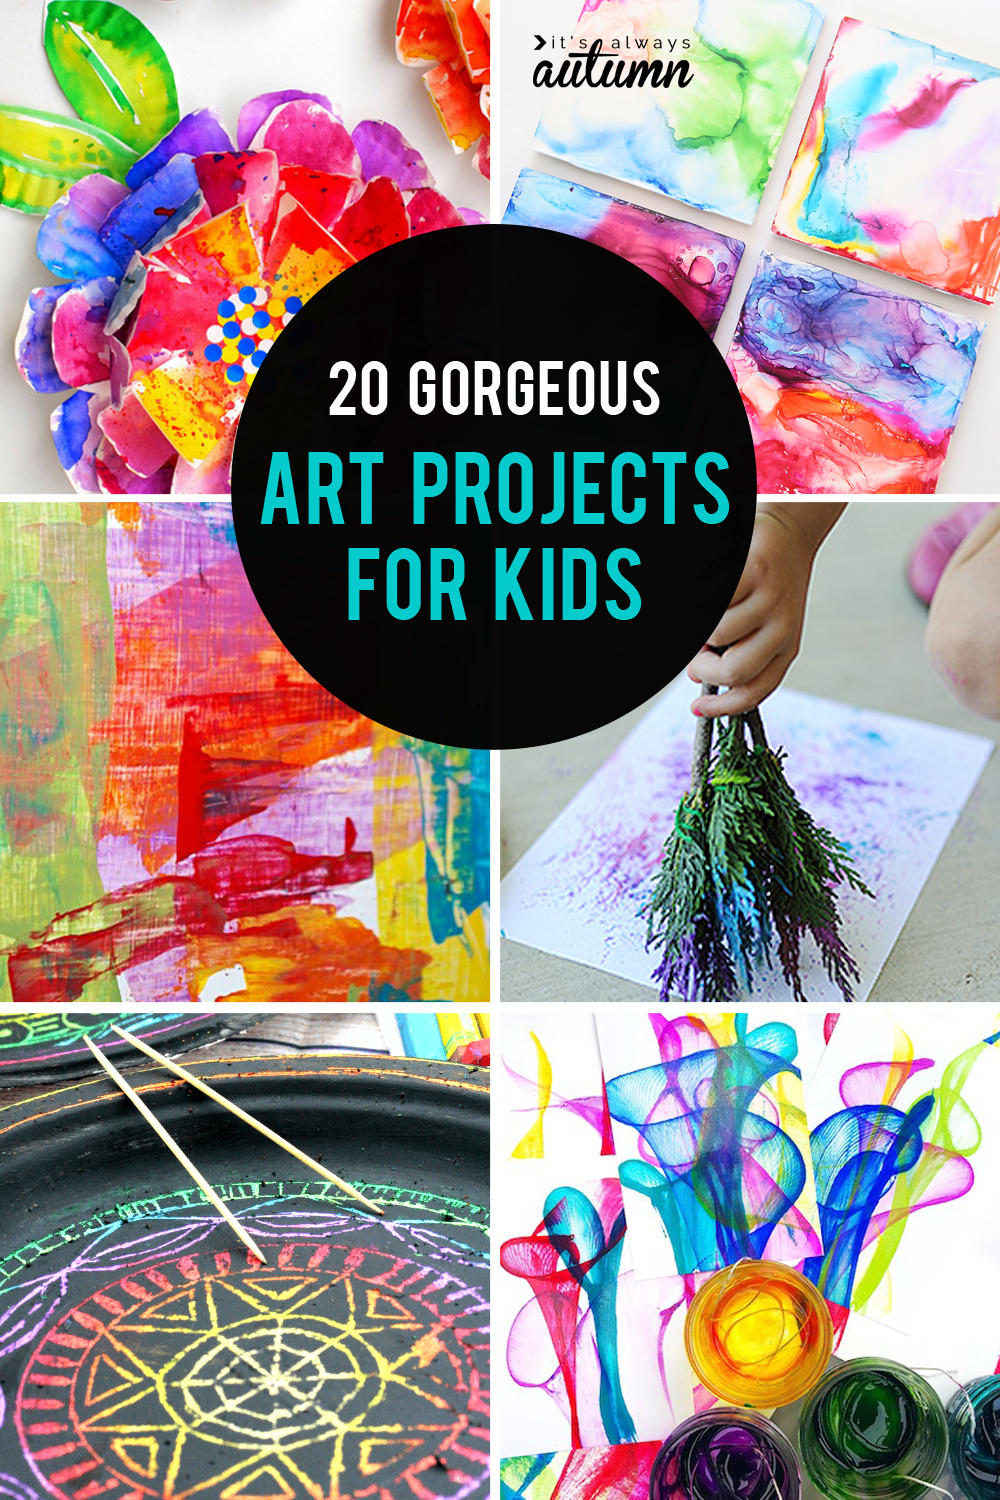 Collage of 20 gorgeous art projects for kids